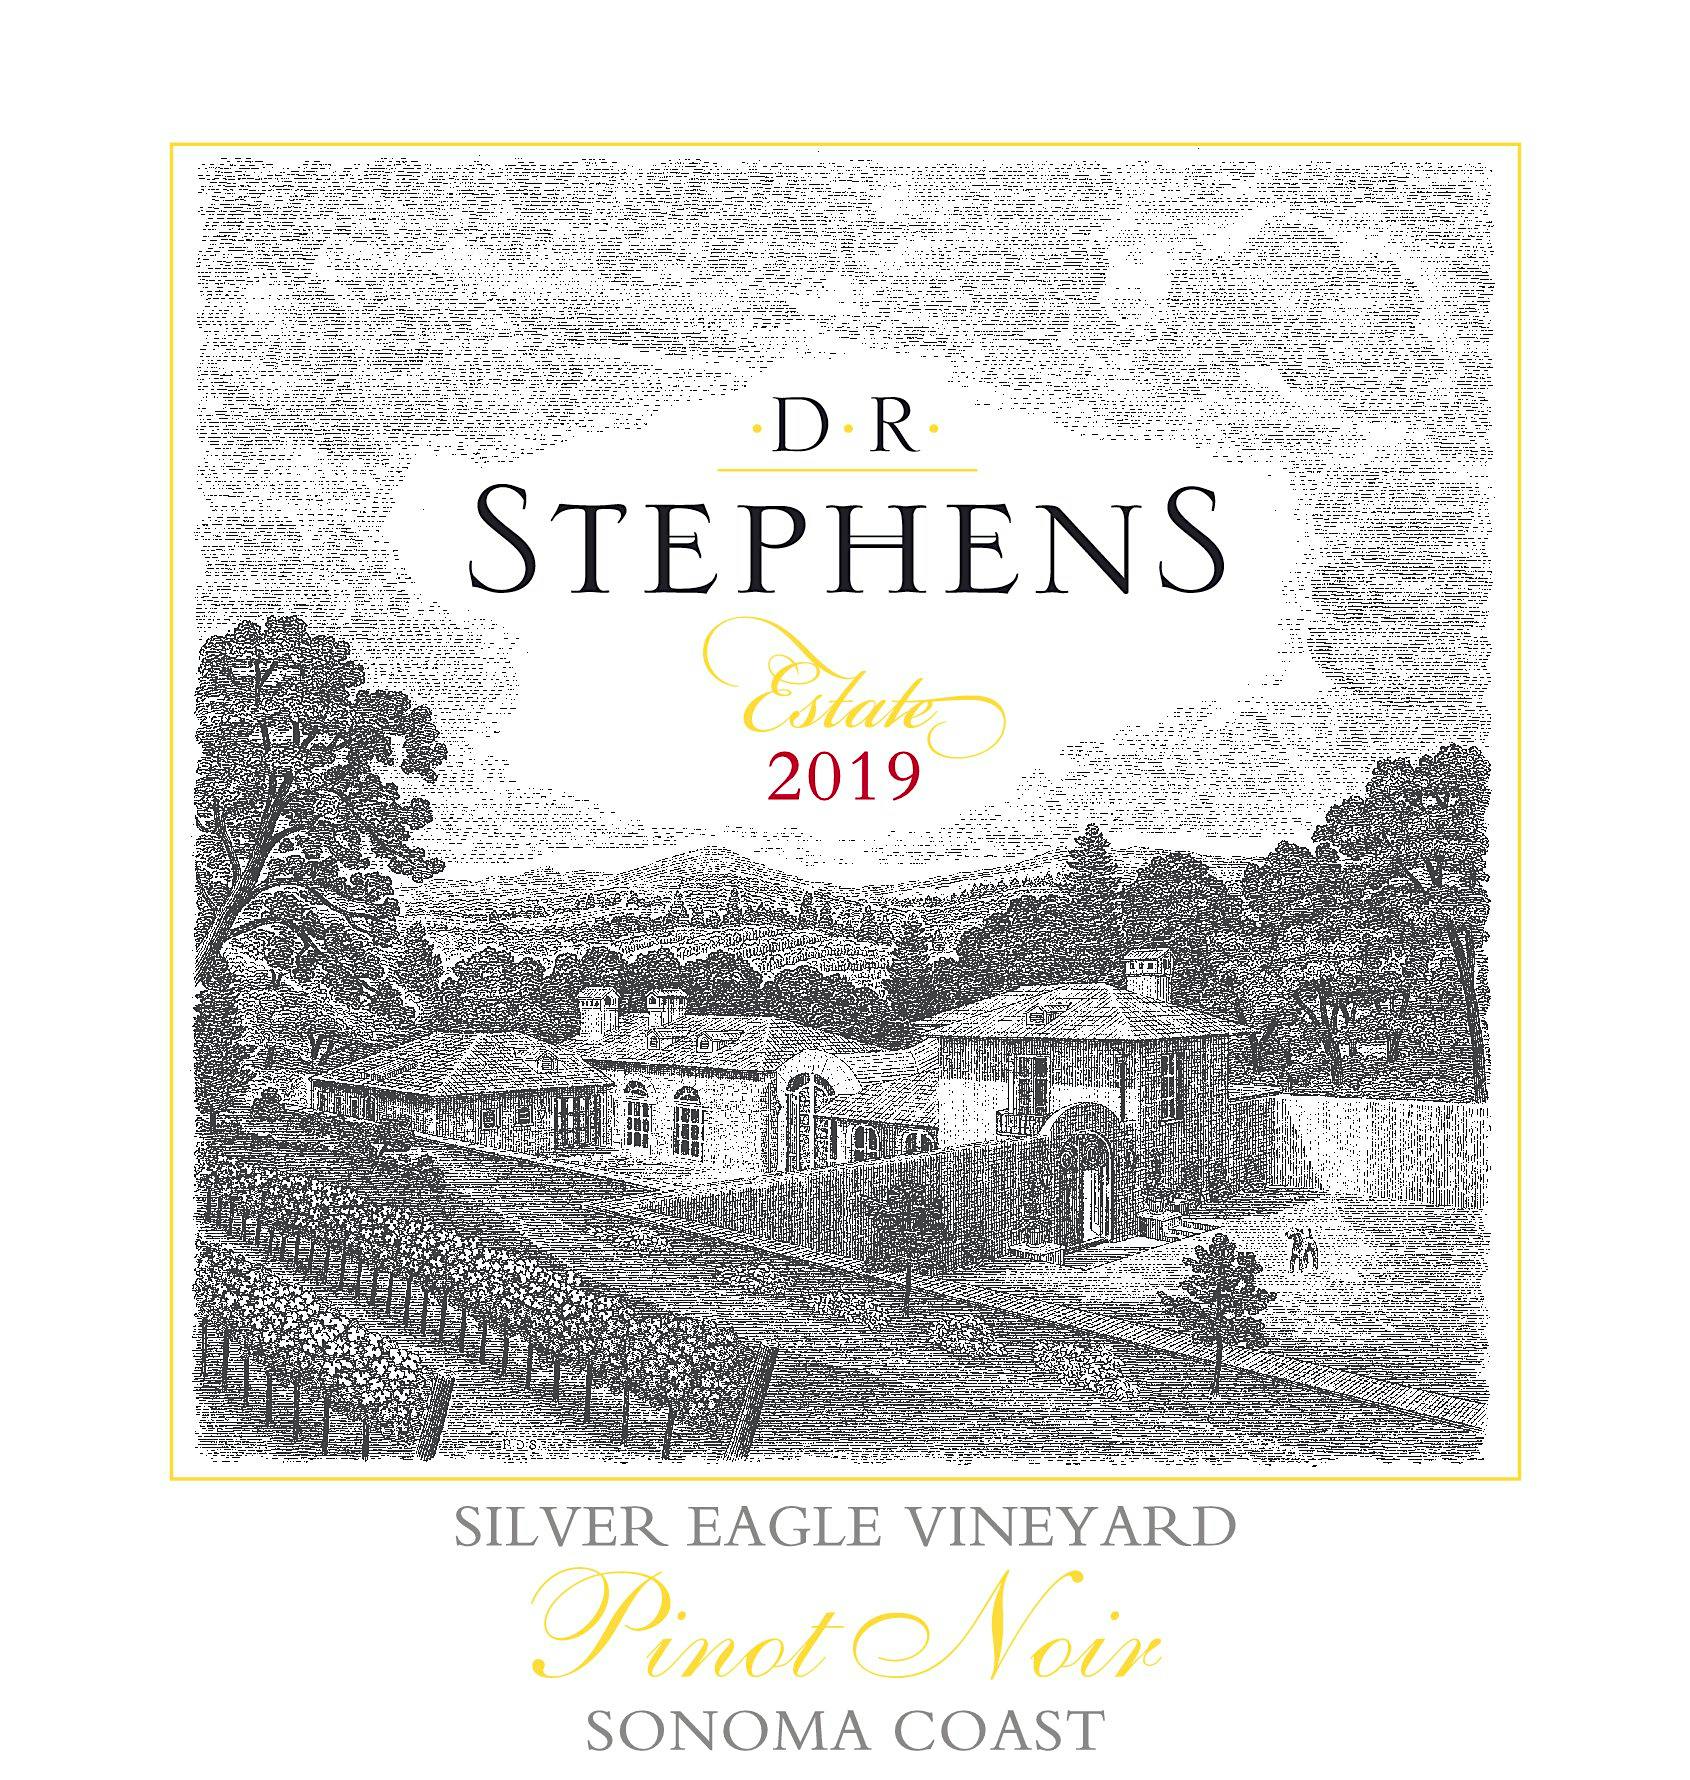 Label for D.R. Stephens